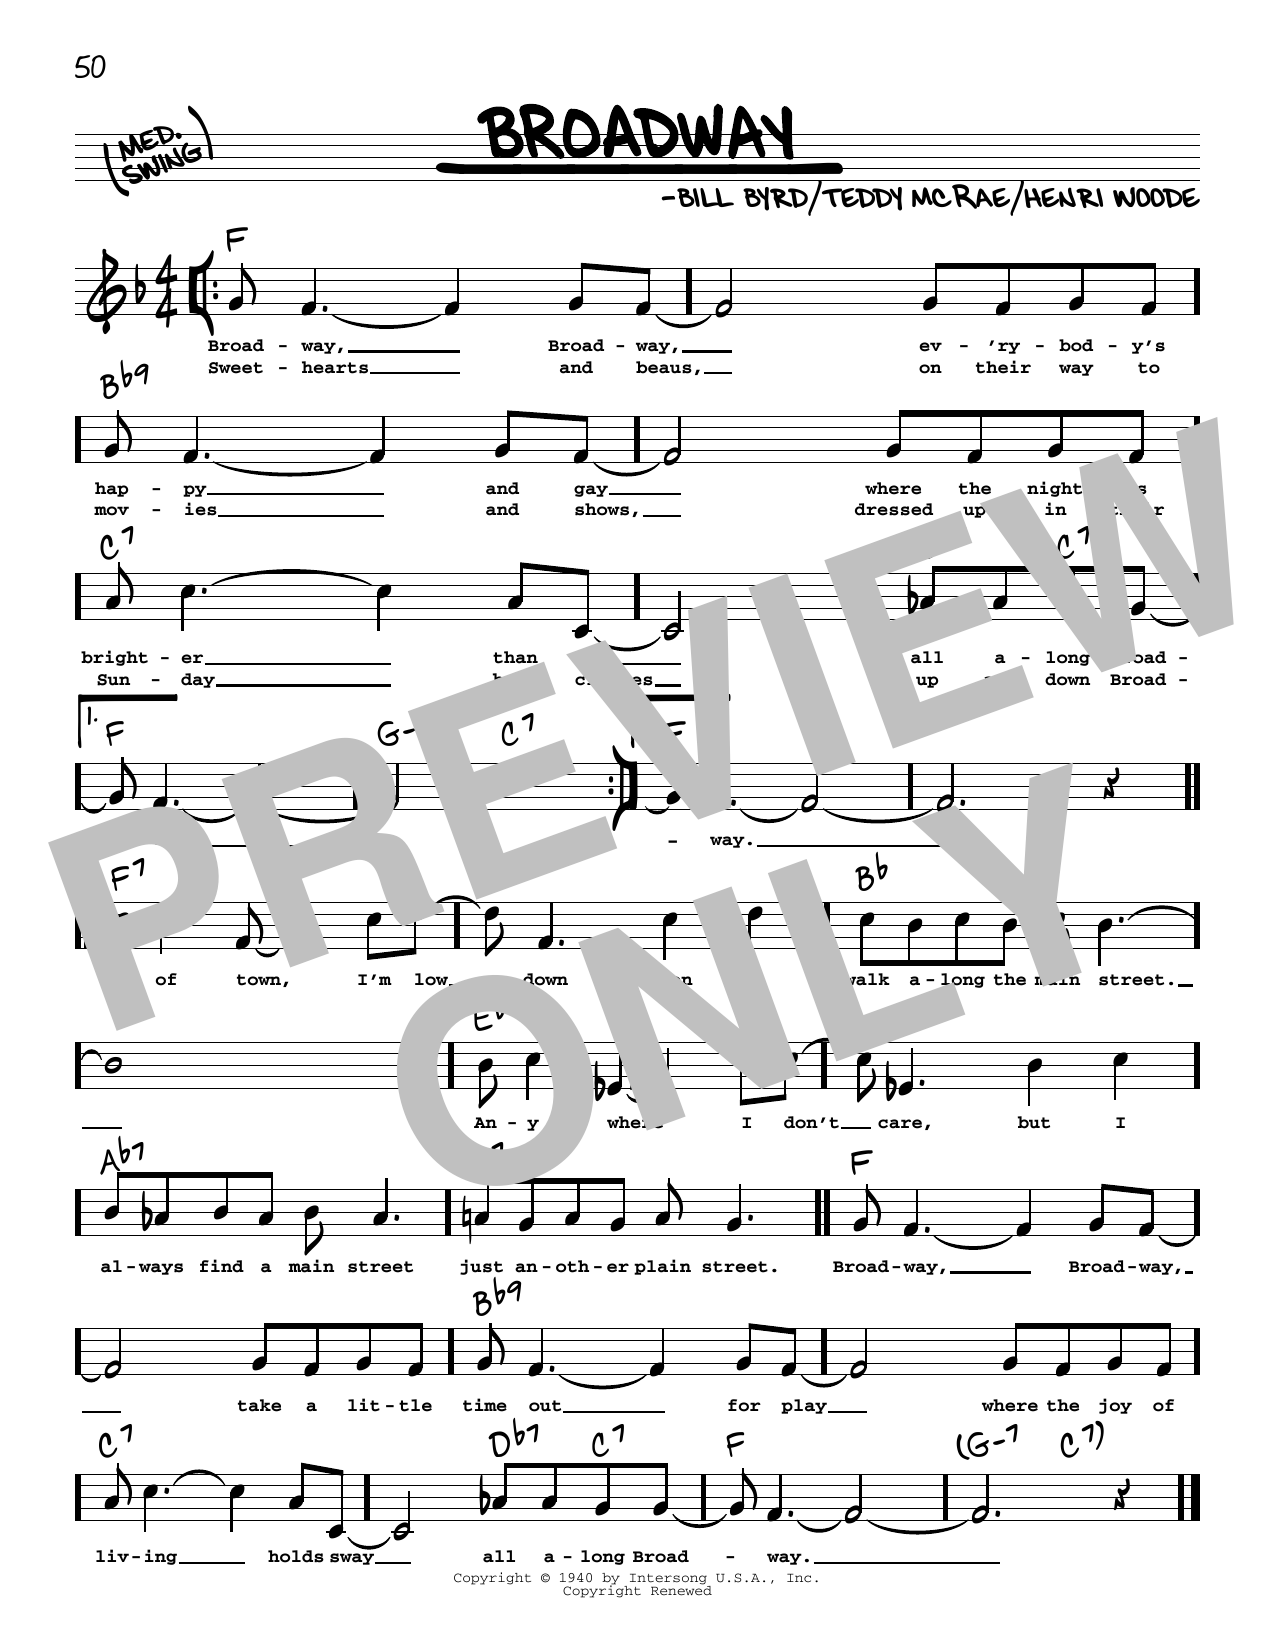 Download Count Basie Broadway (High Voice) Sheet Music